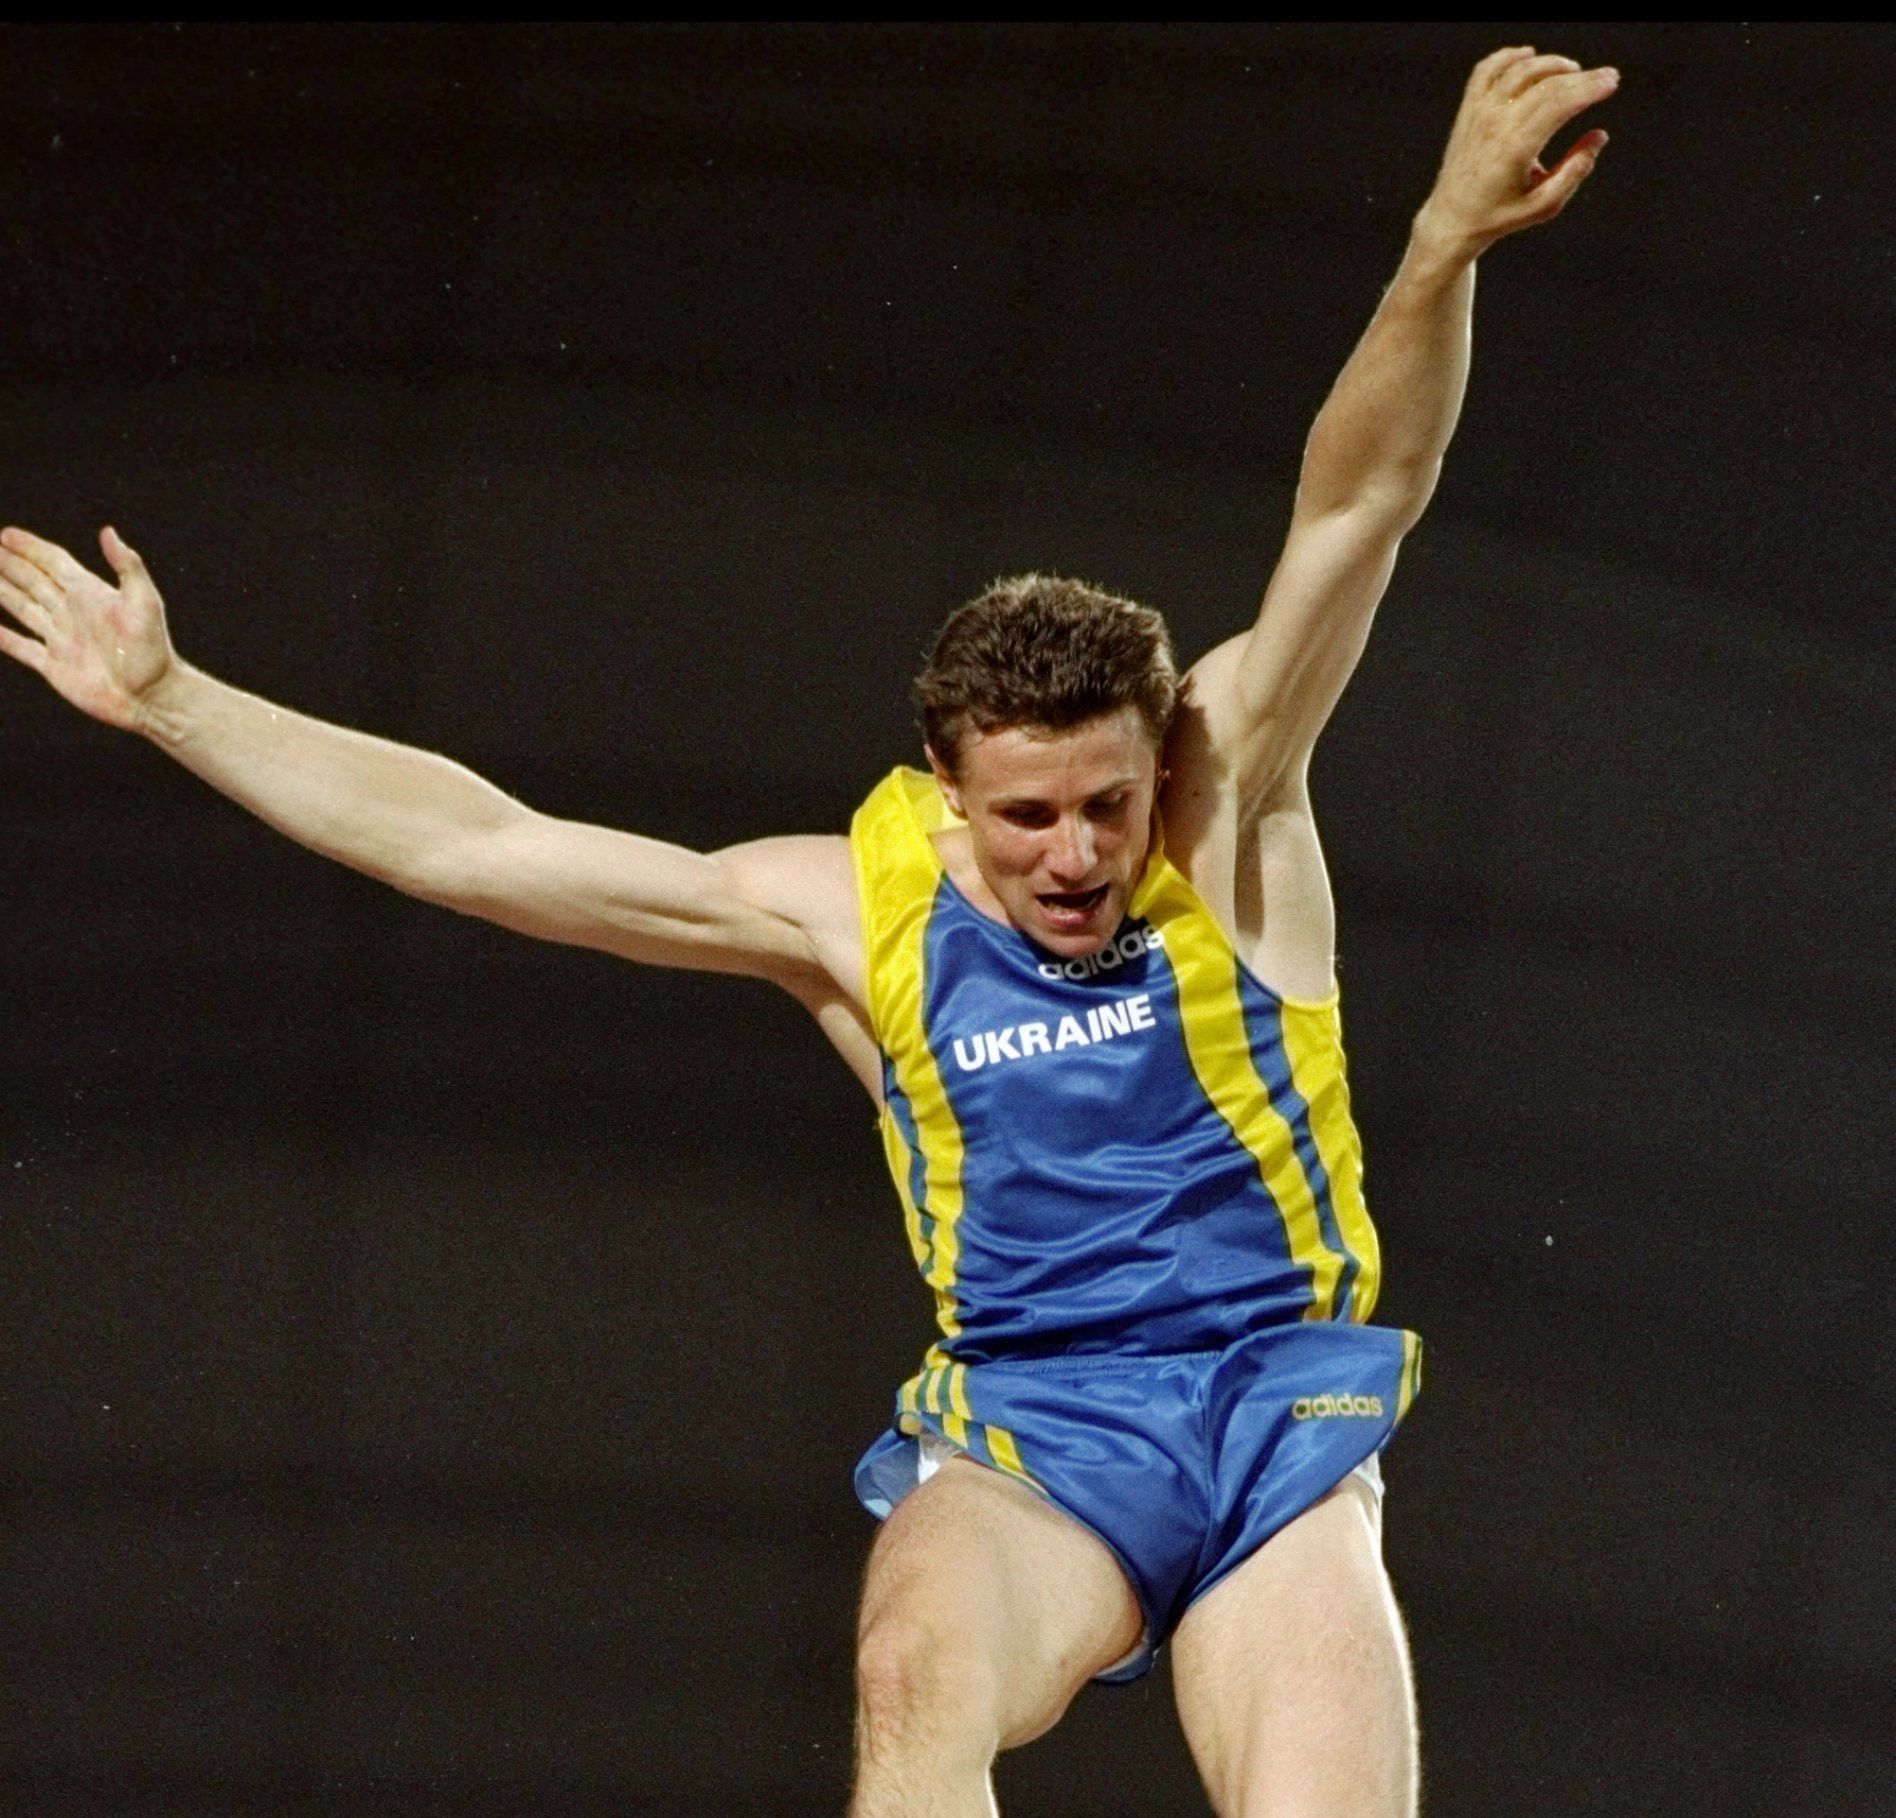 Sergey Bubka competes in the pole vault at the 1993 World Championships in Stuttgart